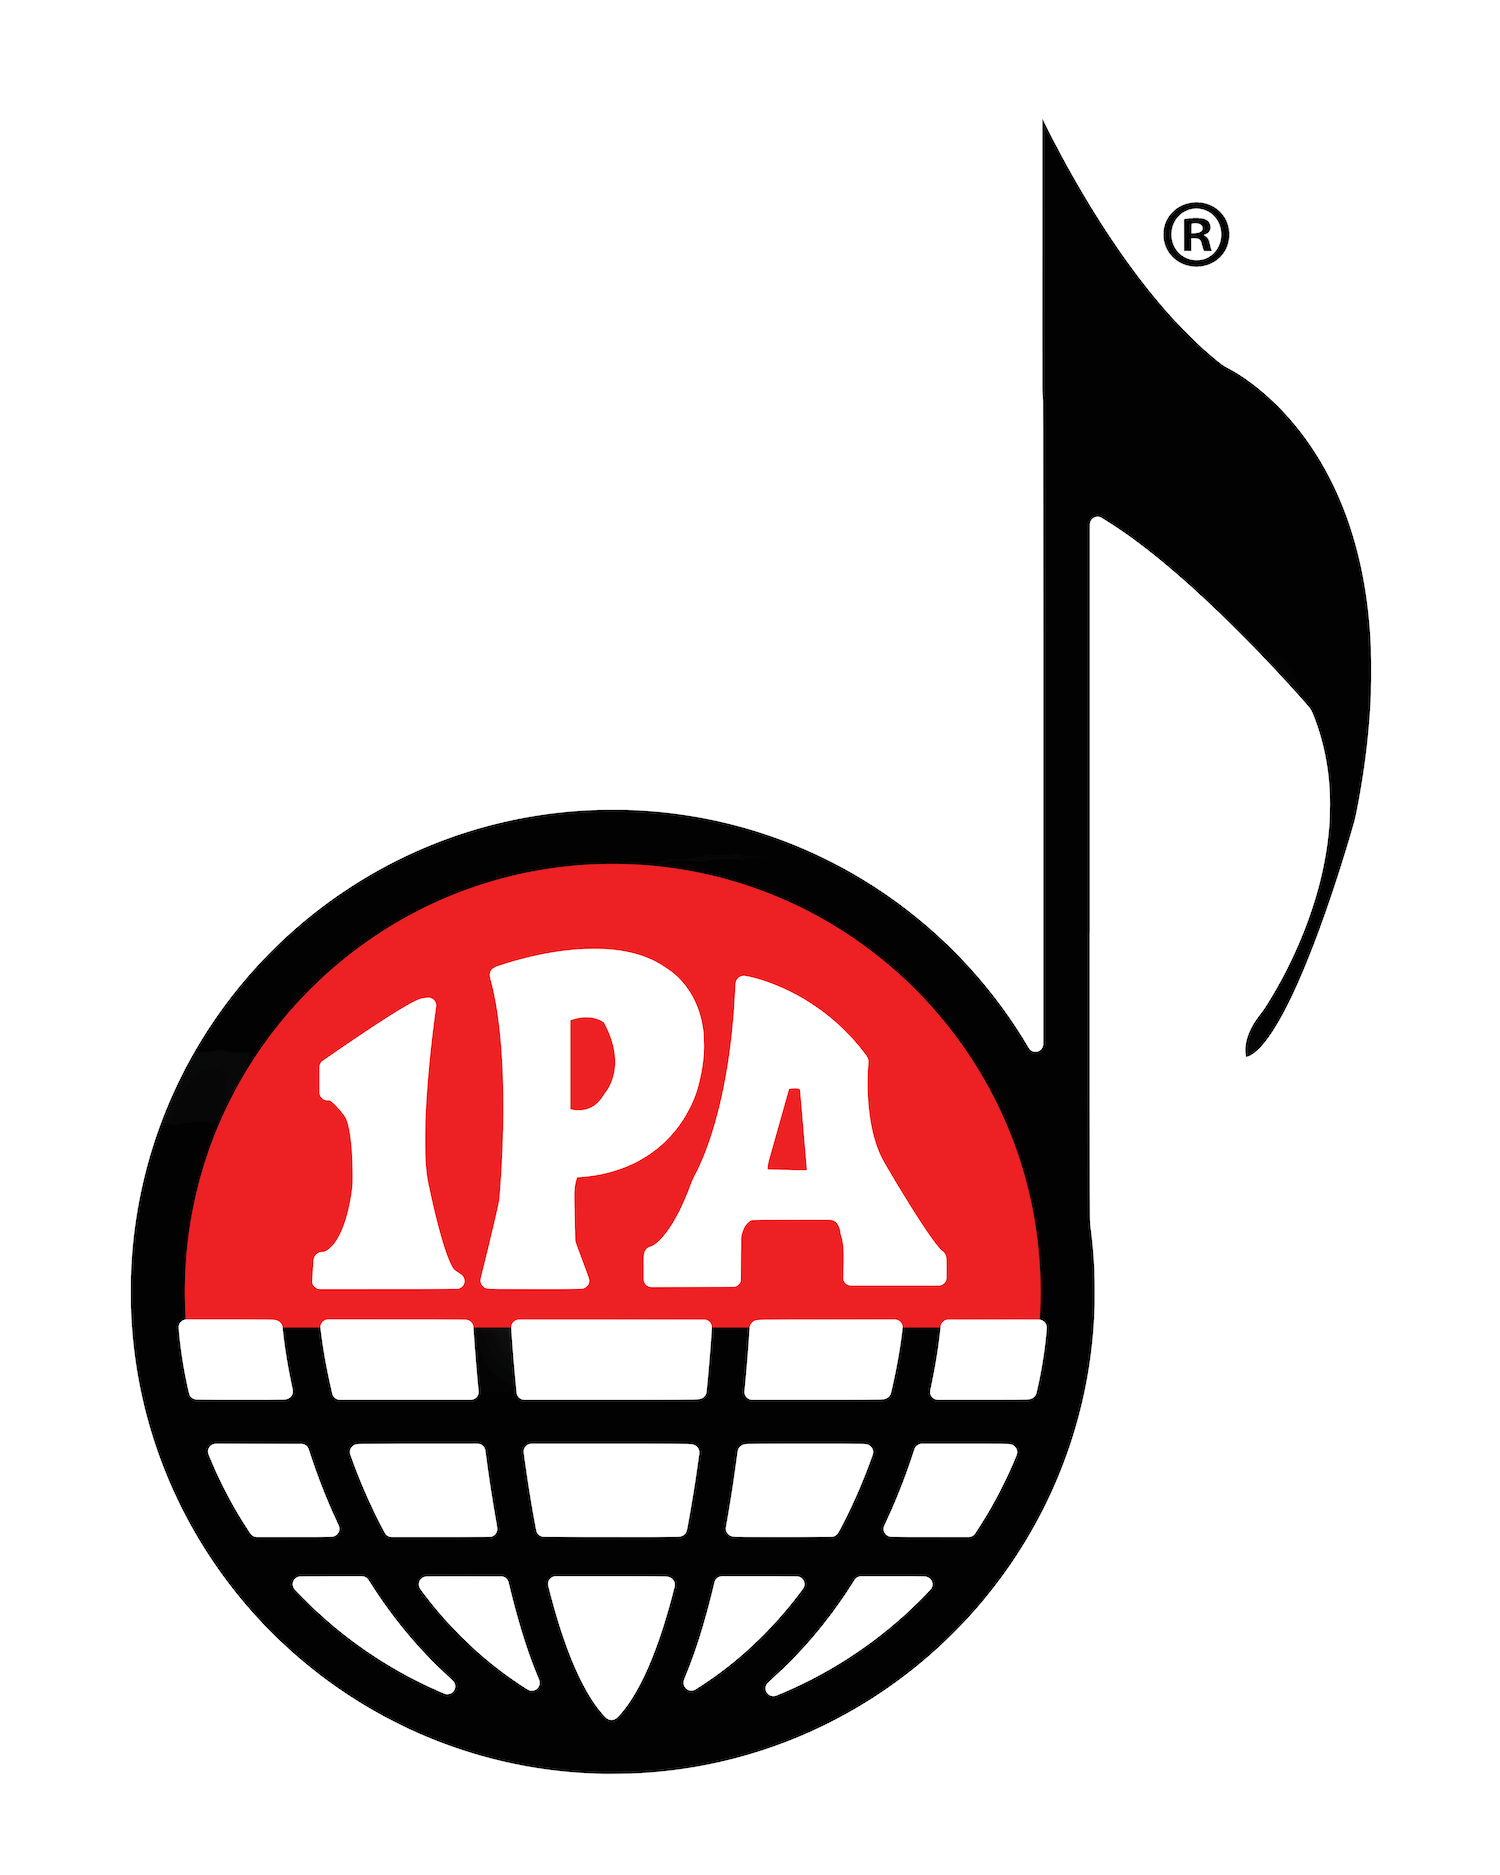 IPA Festival and Convention